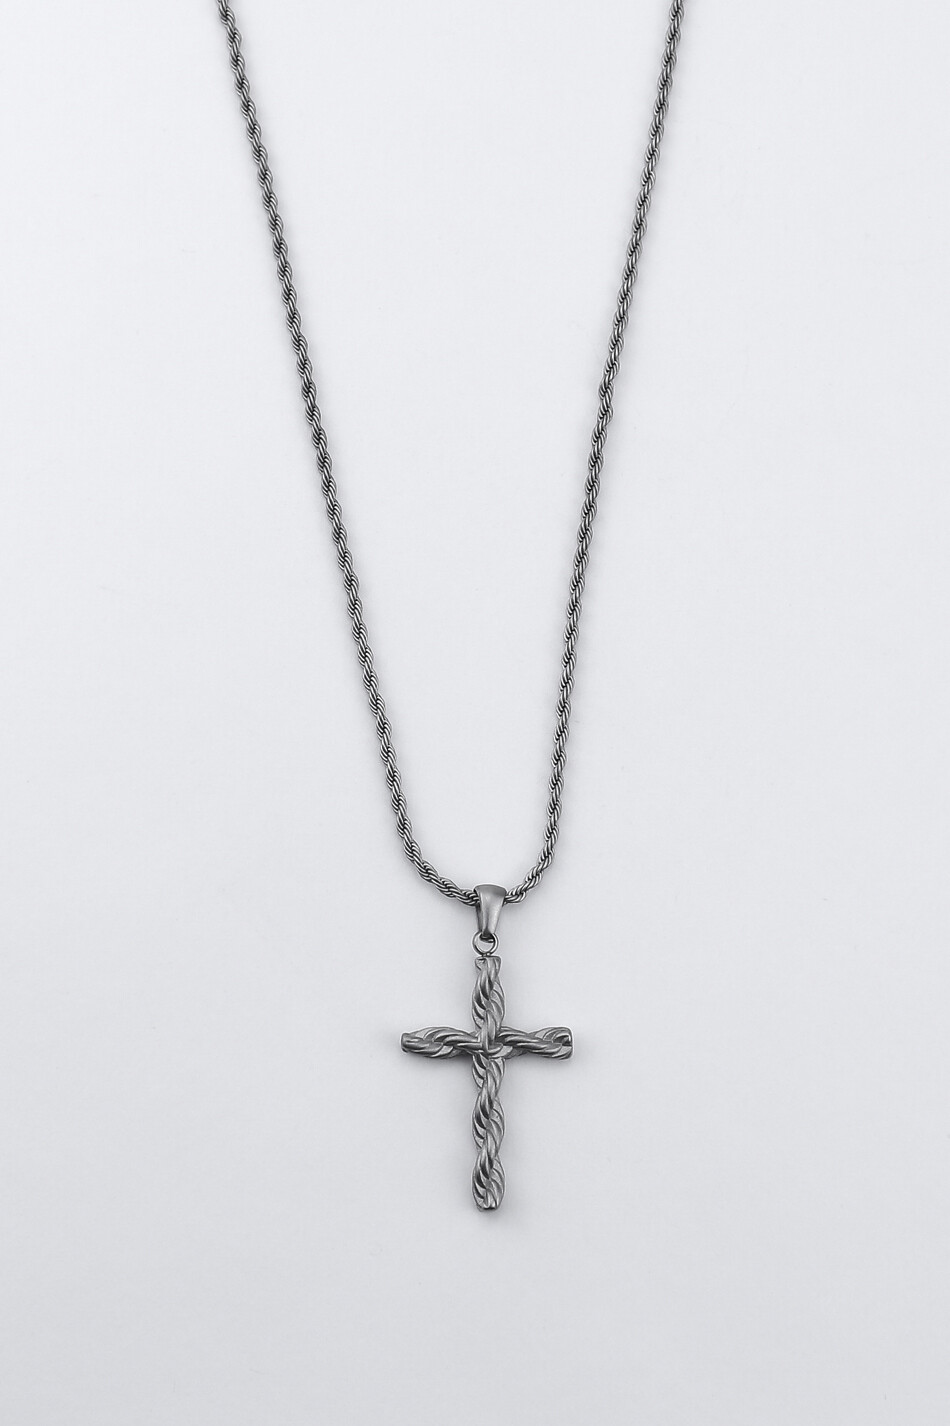 Chain with a small "Cross - harness" pendant